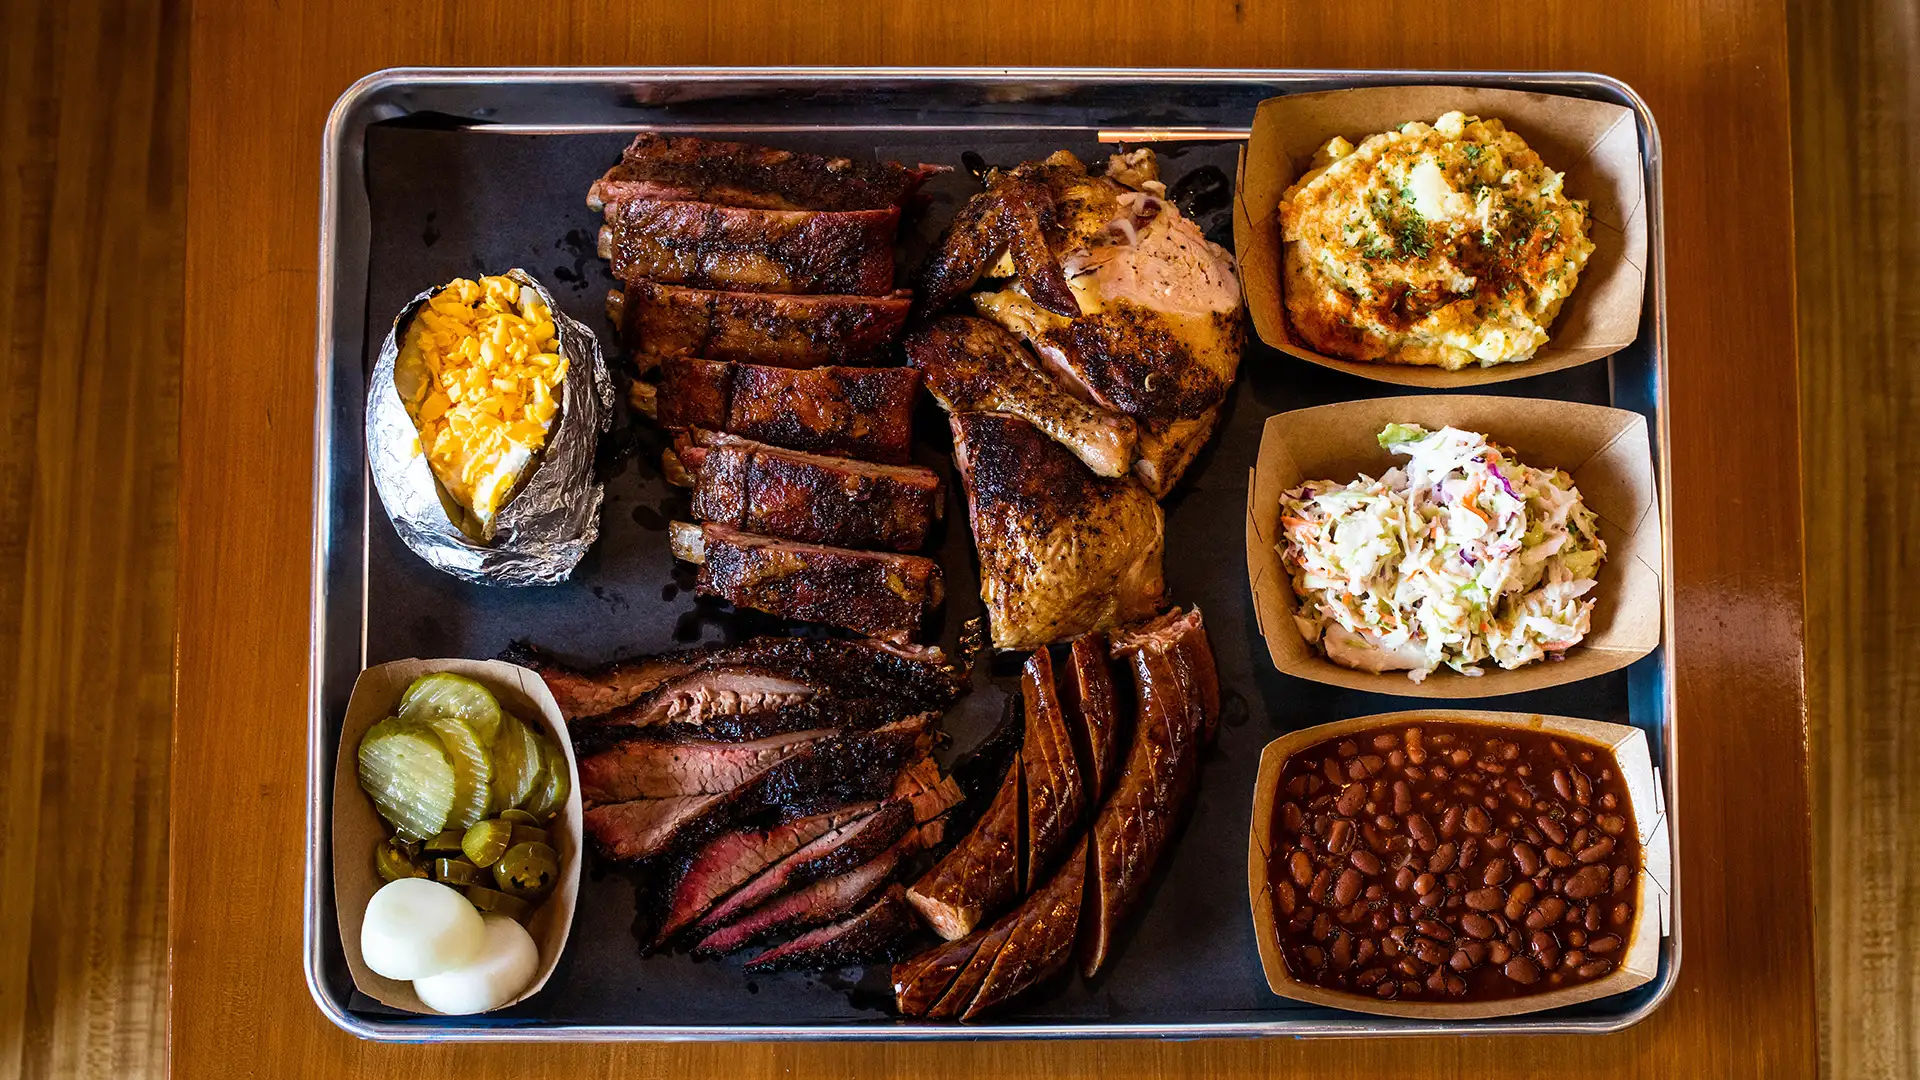 Family plate with ribs, brisket, sausage, chicken, and sides